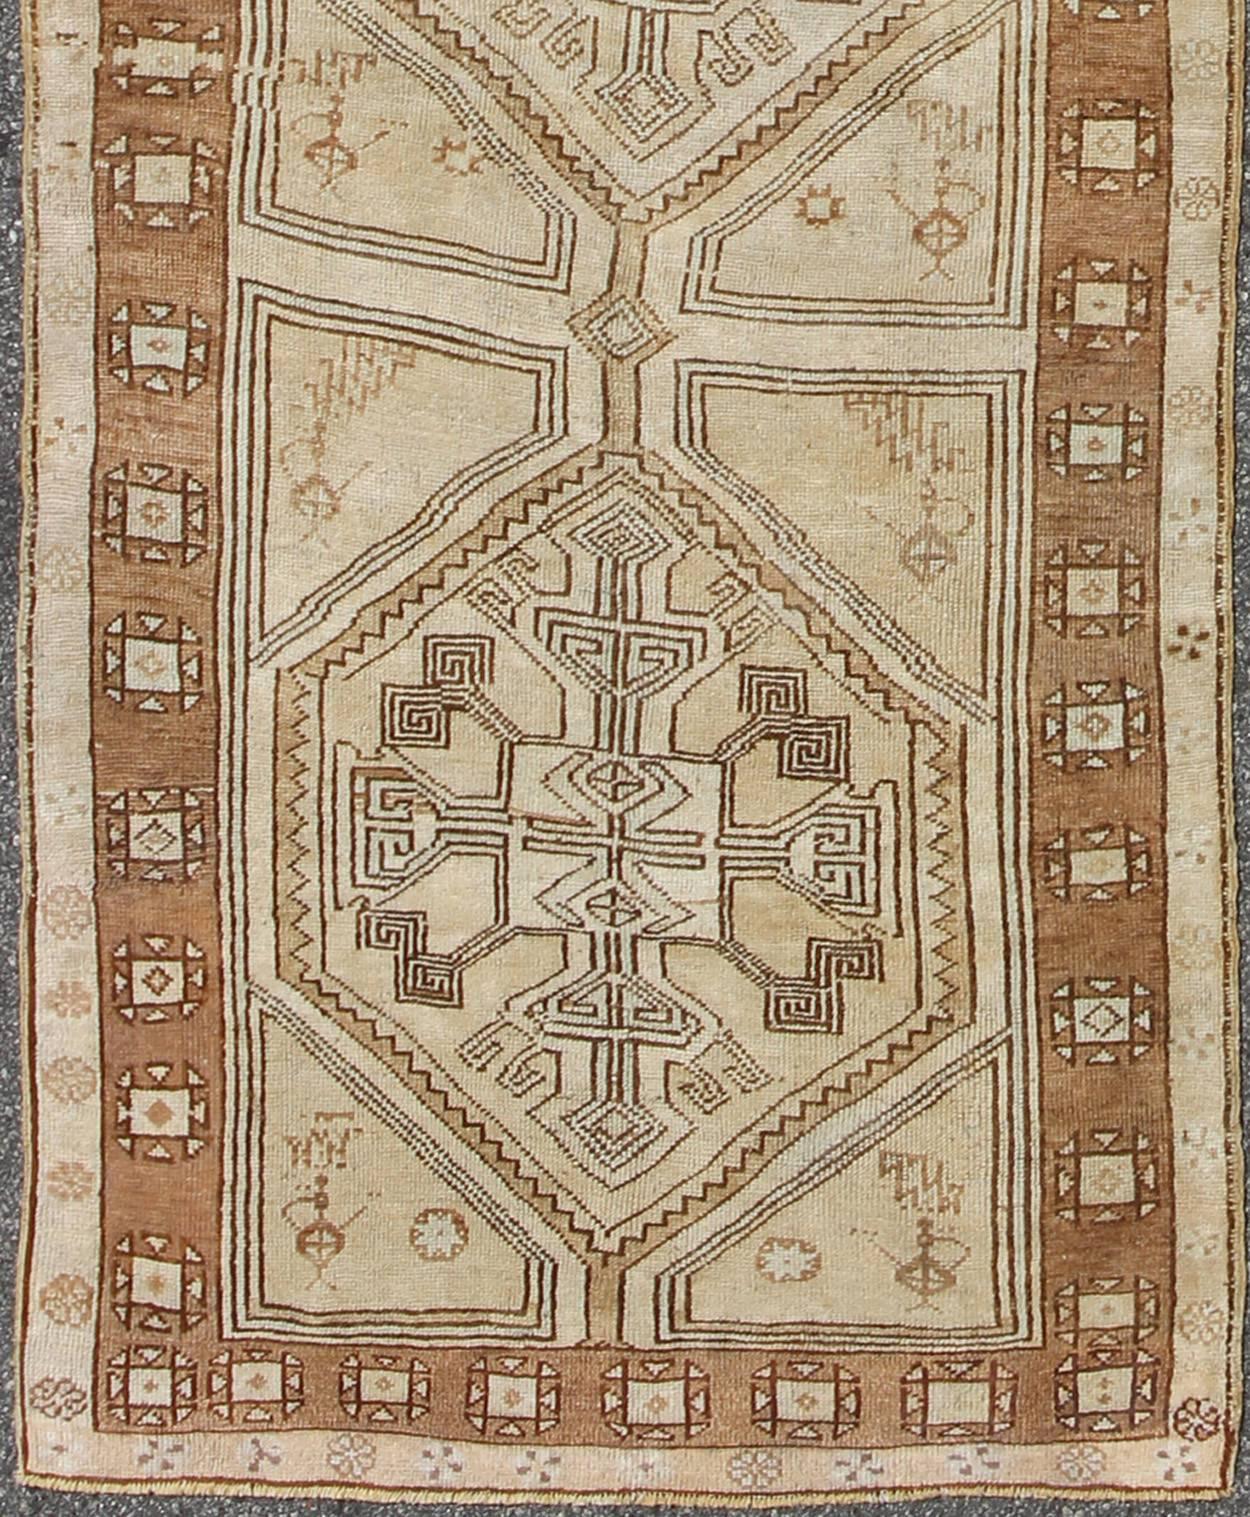 Brown, camel, ivory long Turkish Oushak runner with geometric tribal medallions, rug en-142368, country of origin / type: Turkey / Oushak, circa mid-20th century.

This vintage Turkish Oushak gallery rug, (circa mid-20th century) features a unique